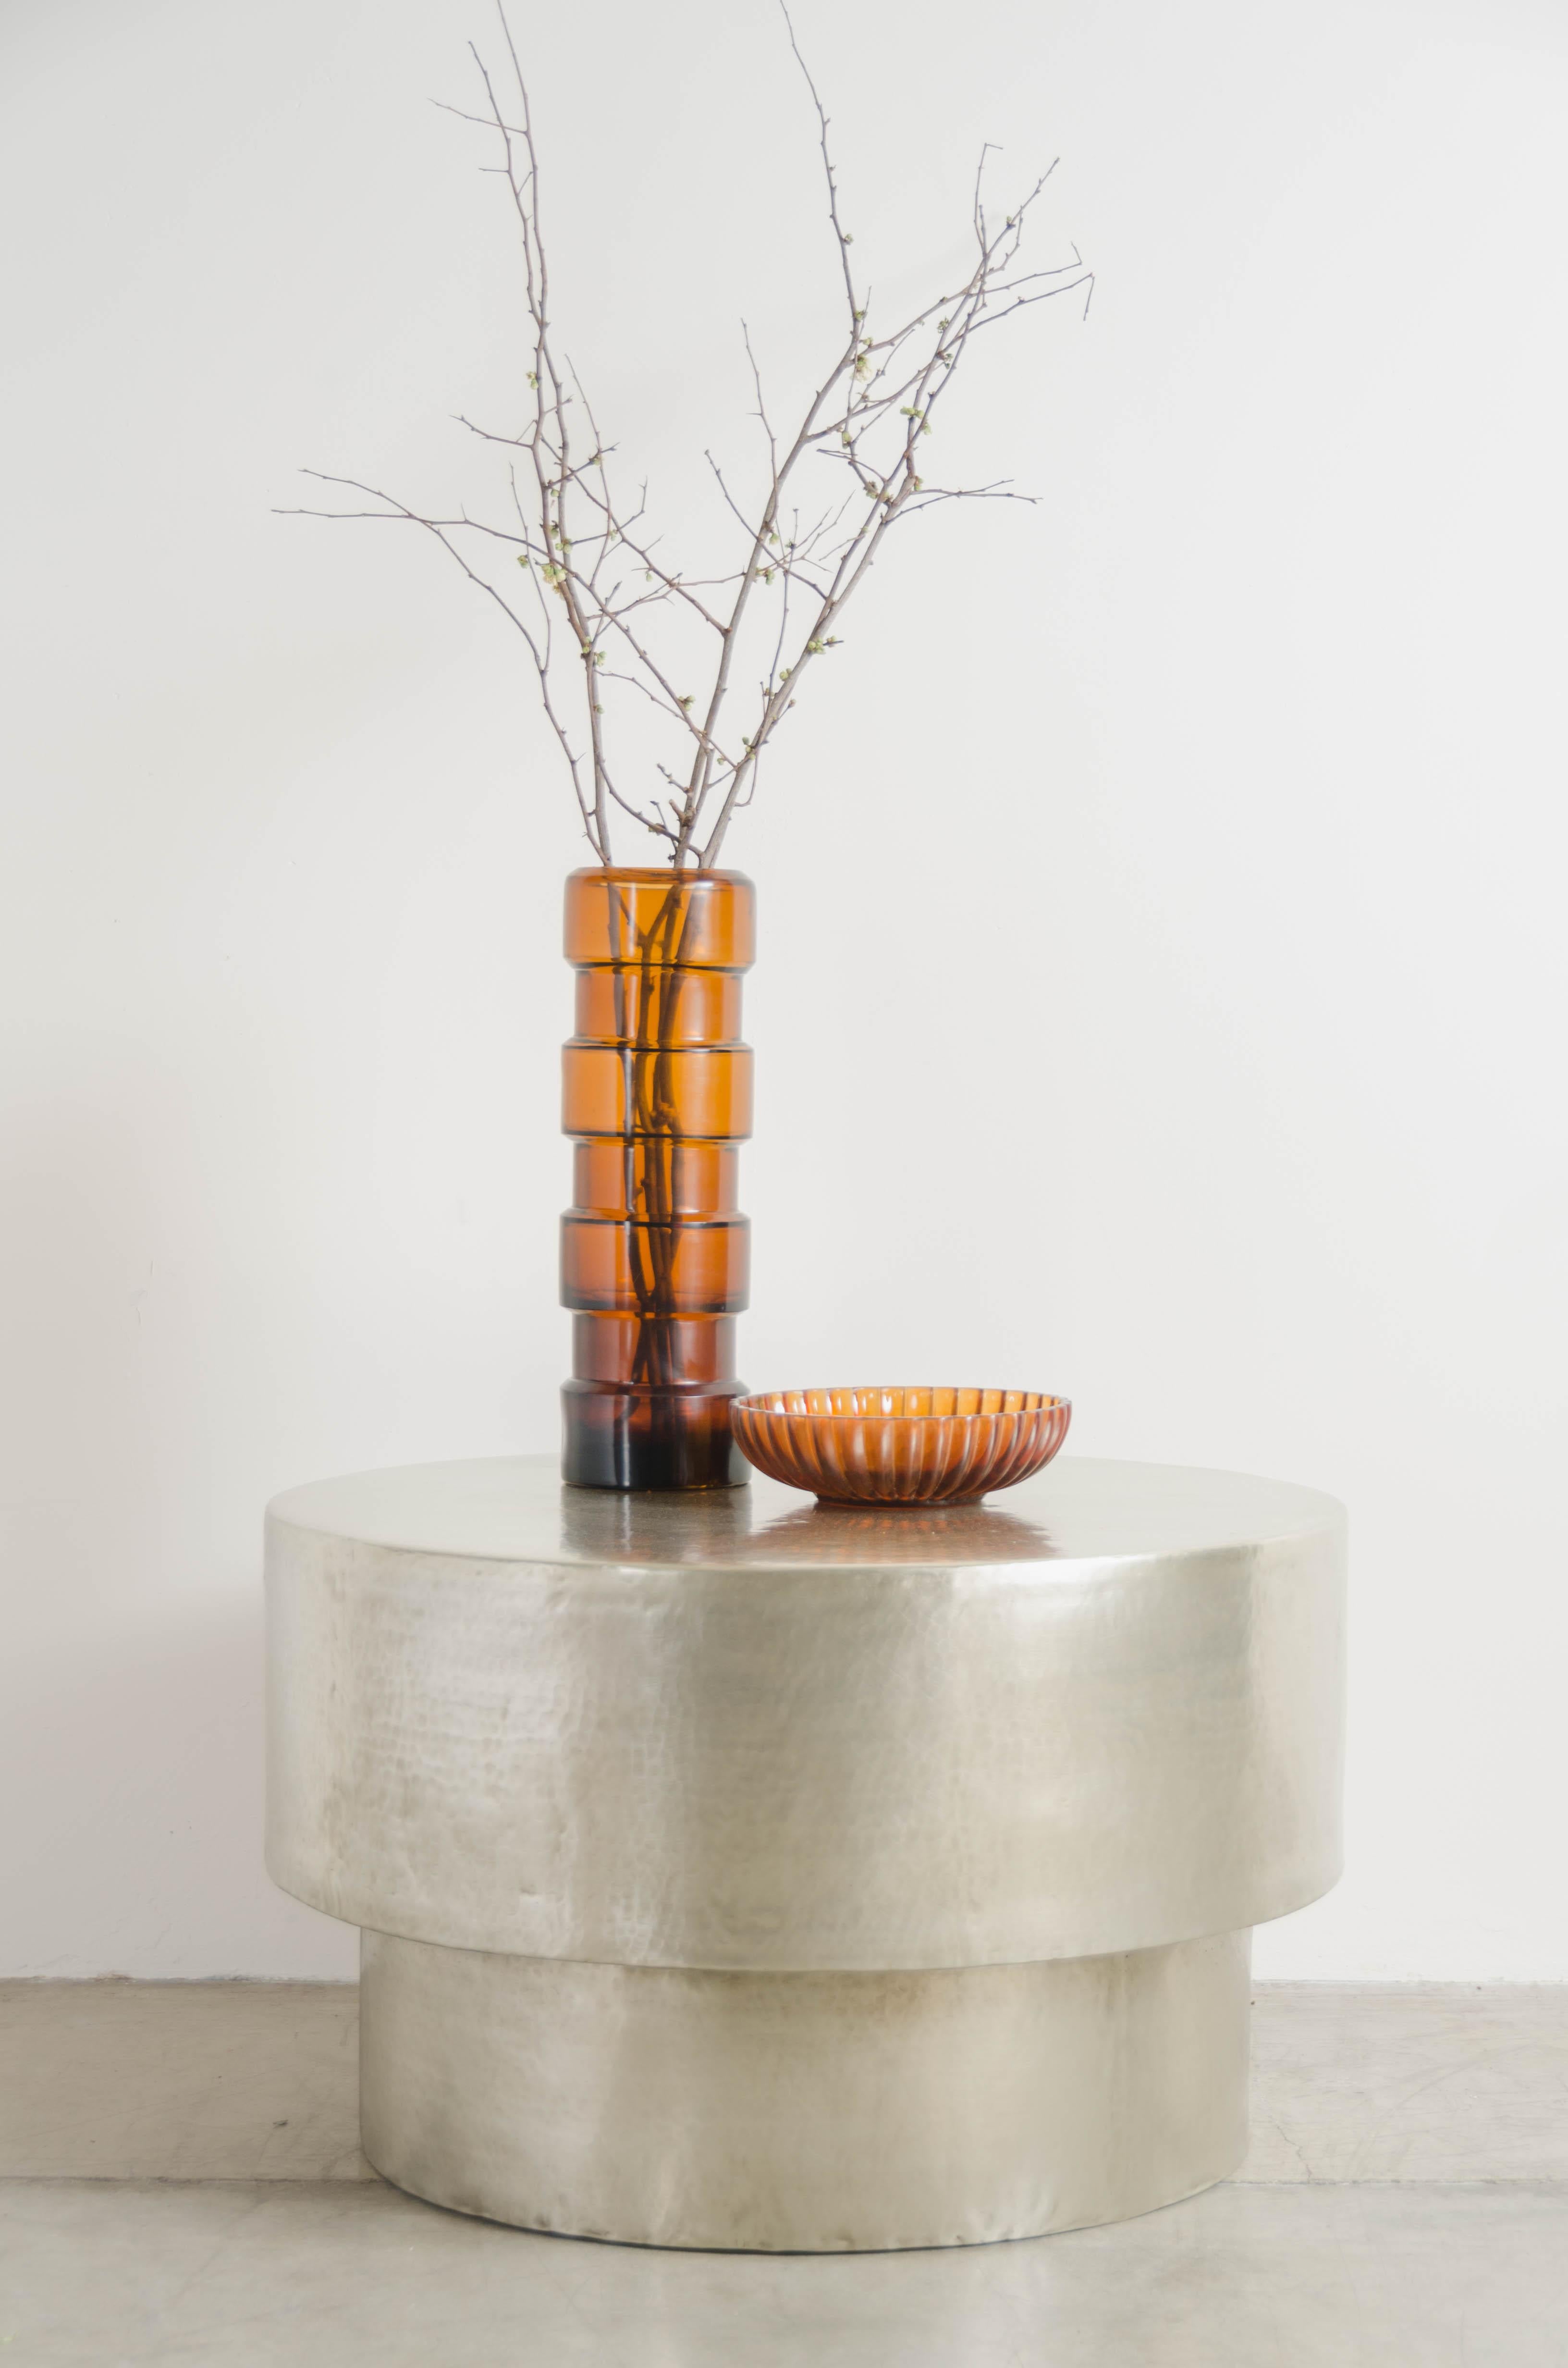 Repoussé Drum Table in White Bronze by Robert Kuo, Limited Edition